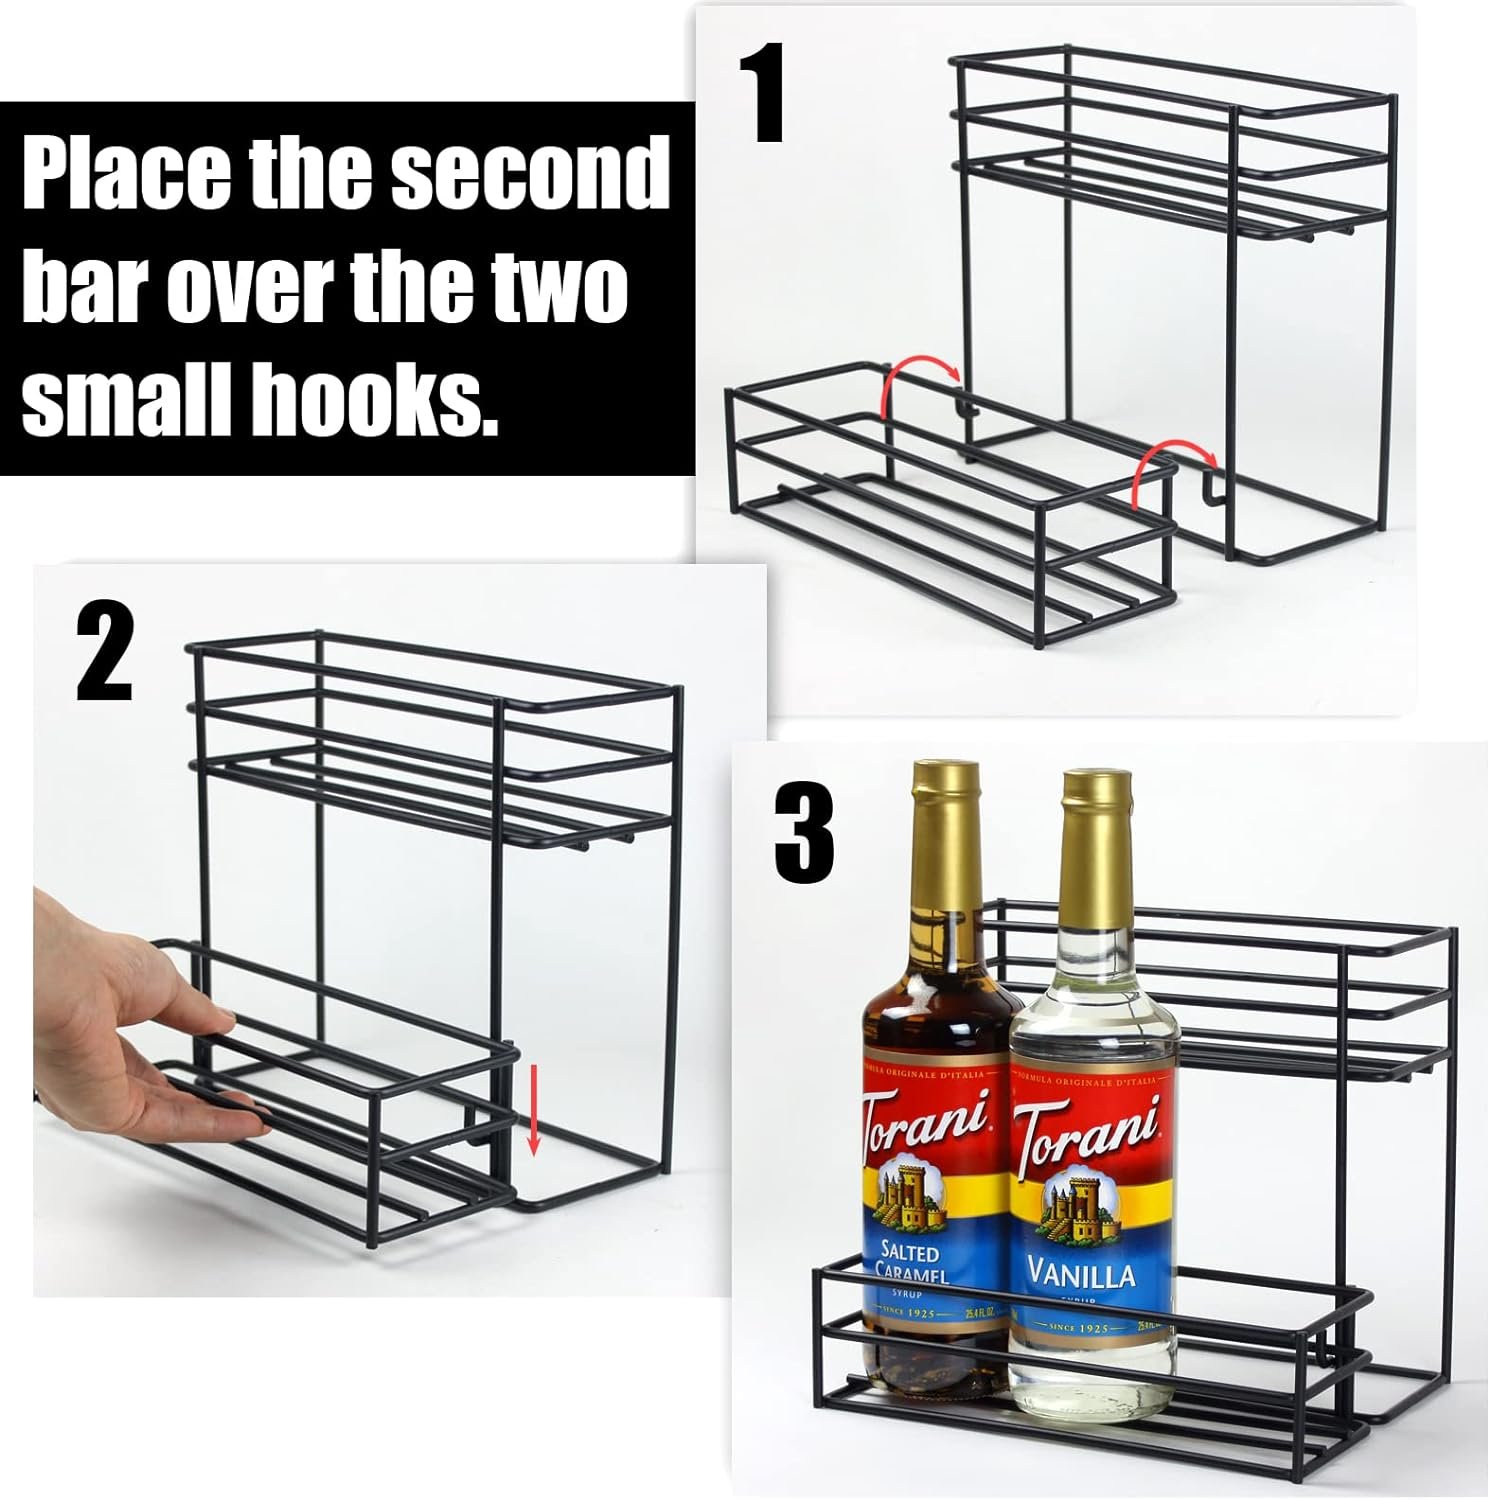 coffee syrup rack 6 bottle capacitycoffee syrup organizer for coffee barkitchensmall wine rack for barfamilystorage for 1 4